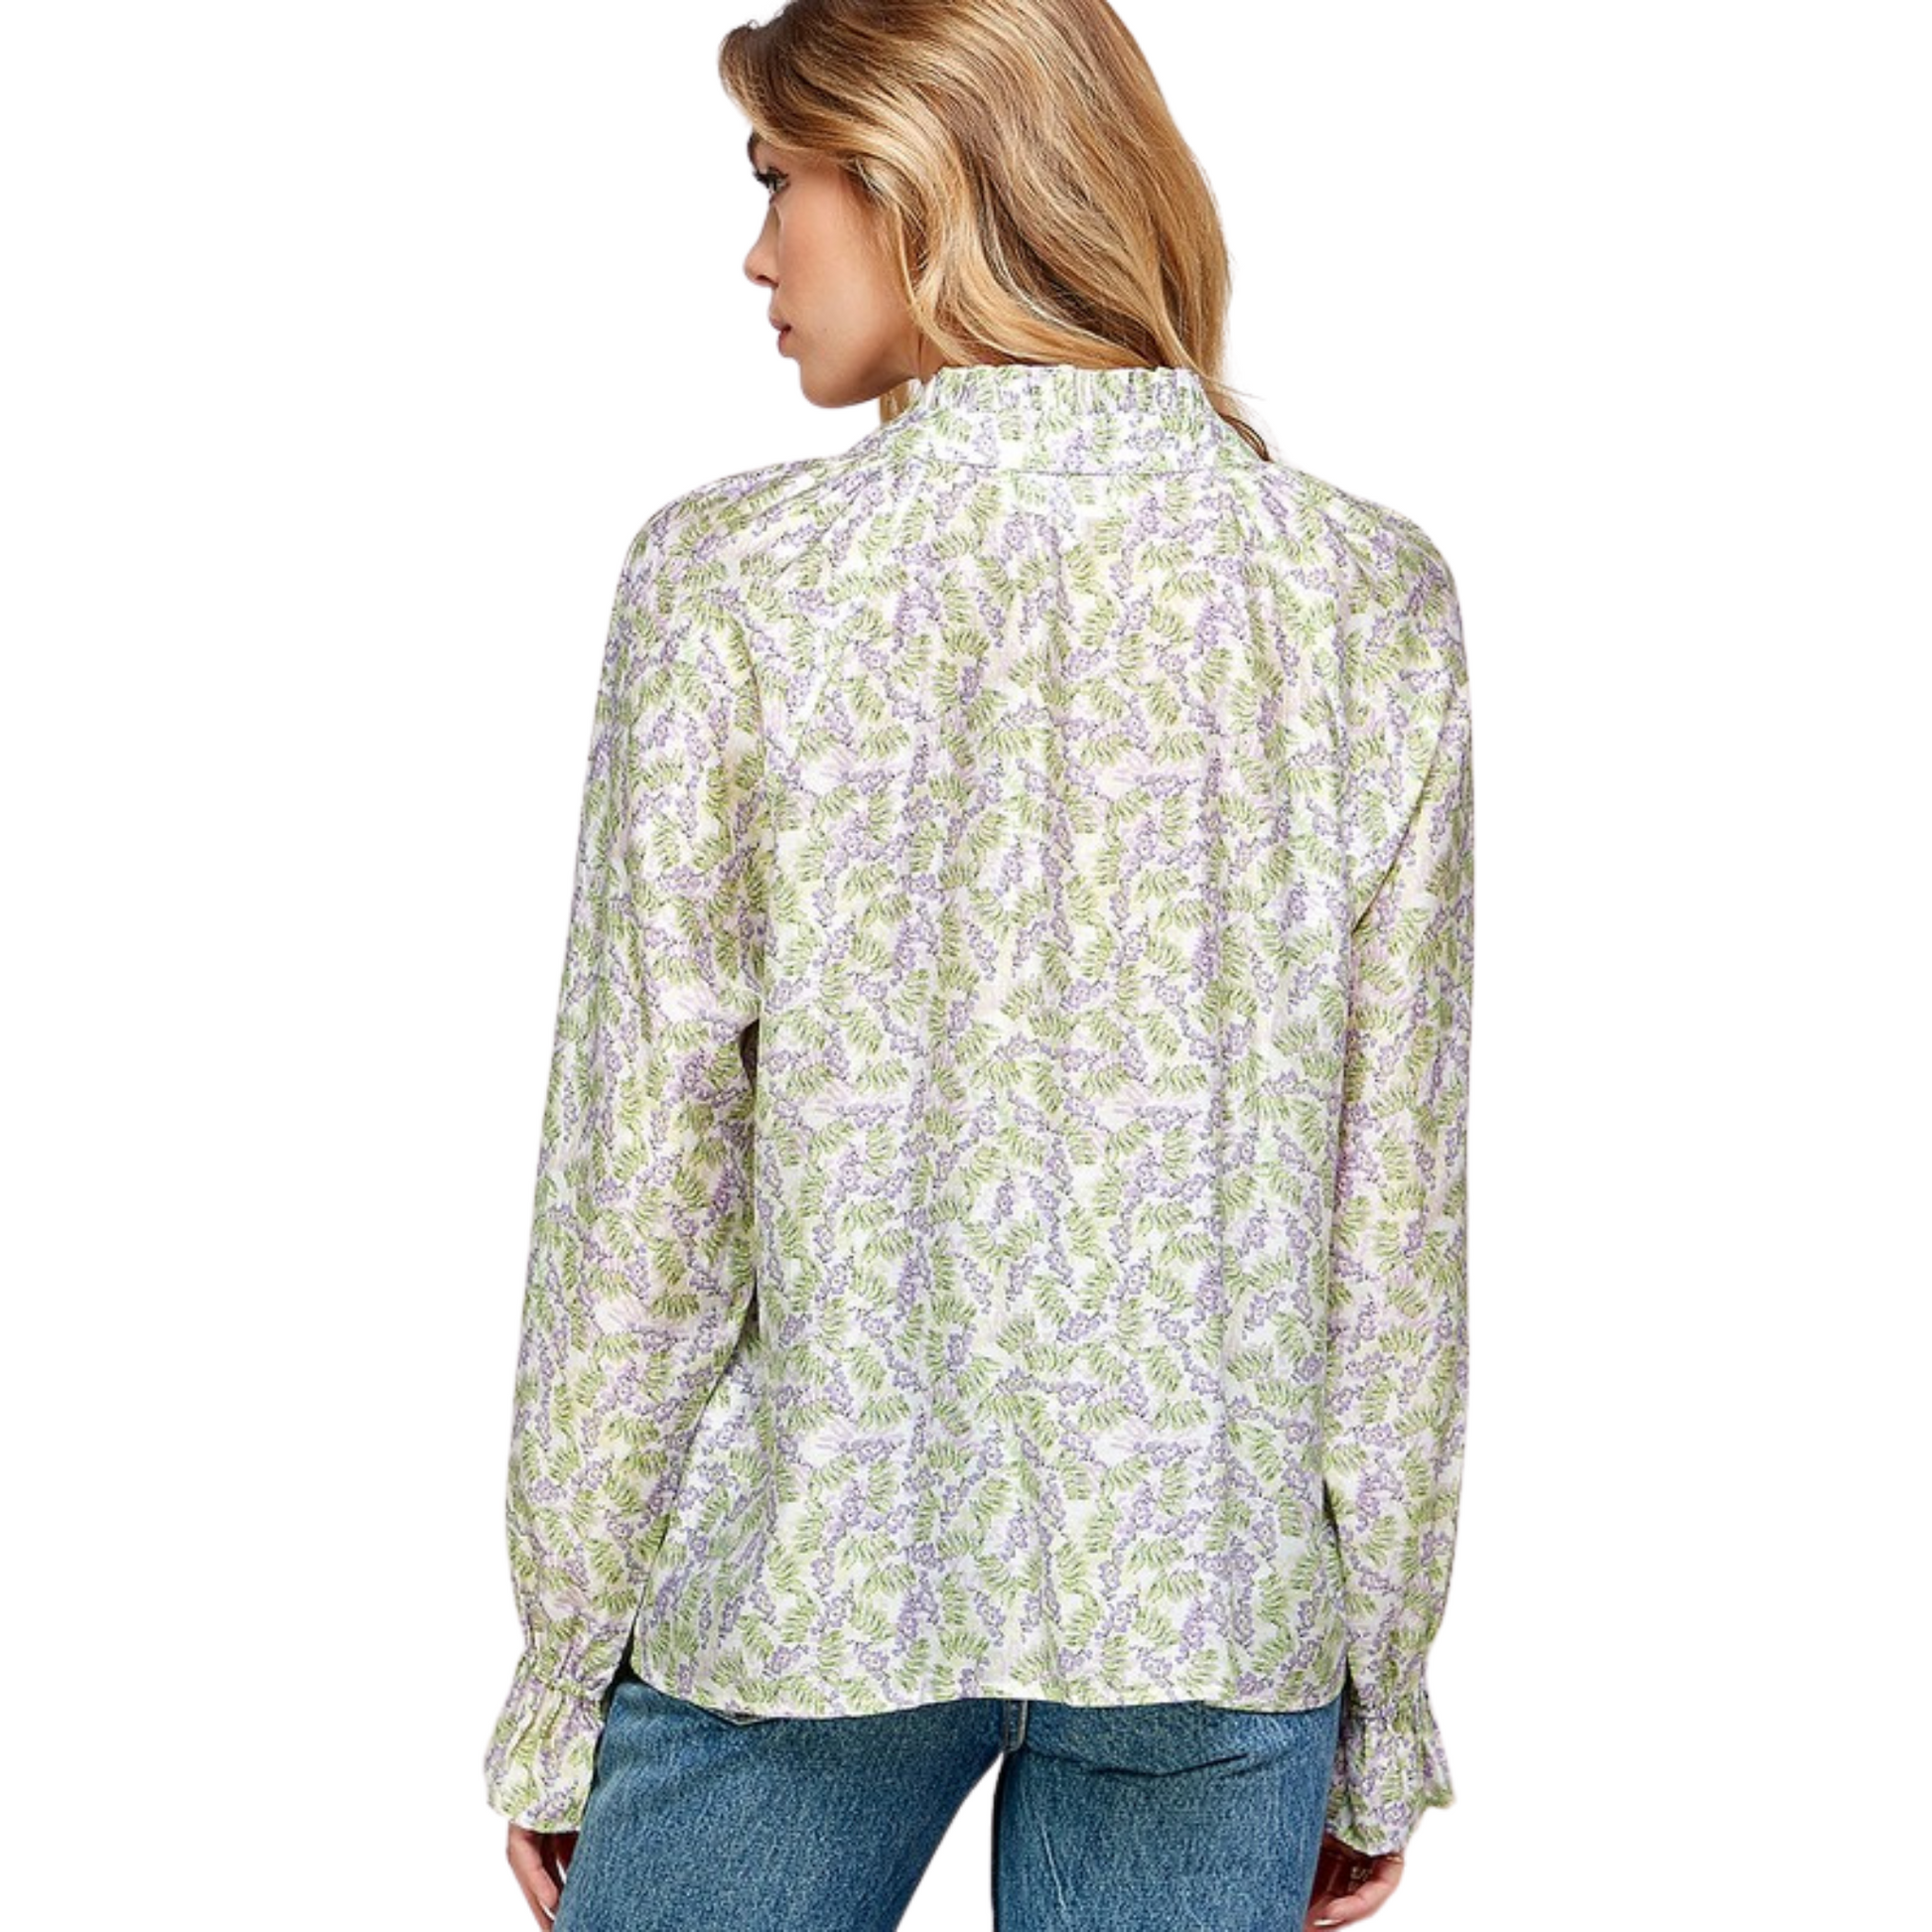 This Floral Print Satin Top is perfect for any occasion! It features a tie top and long sleeves for a secure, comfortable fit. Lightweight fabric makes it a great choice for any season. Perfect for the fashion-forward woman!